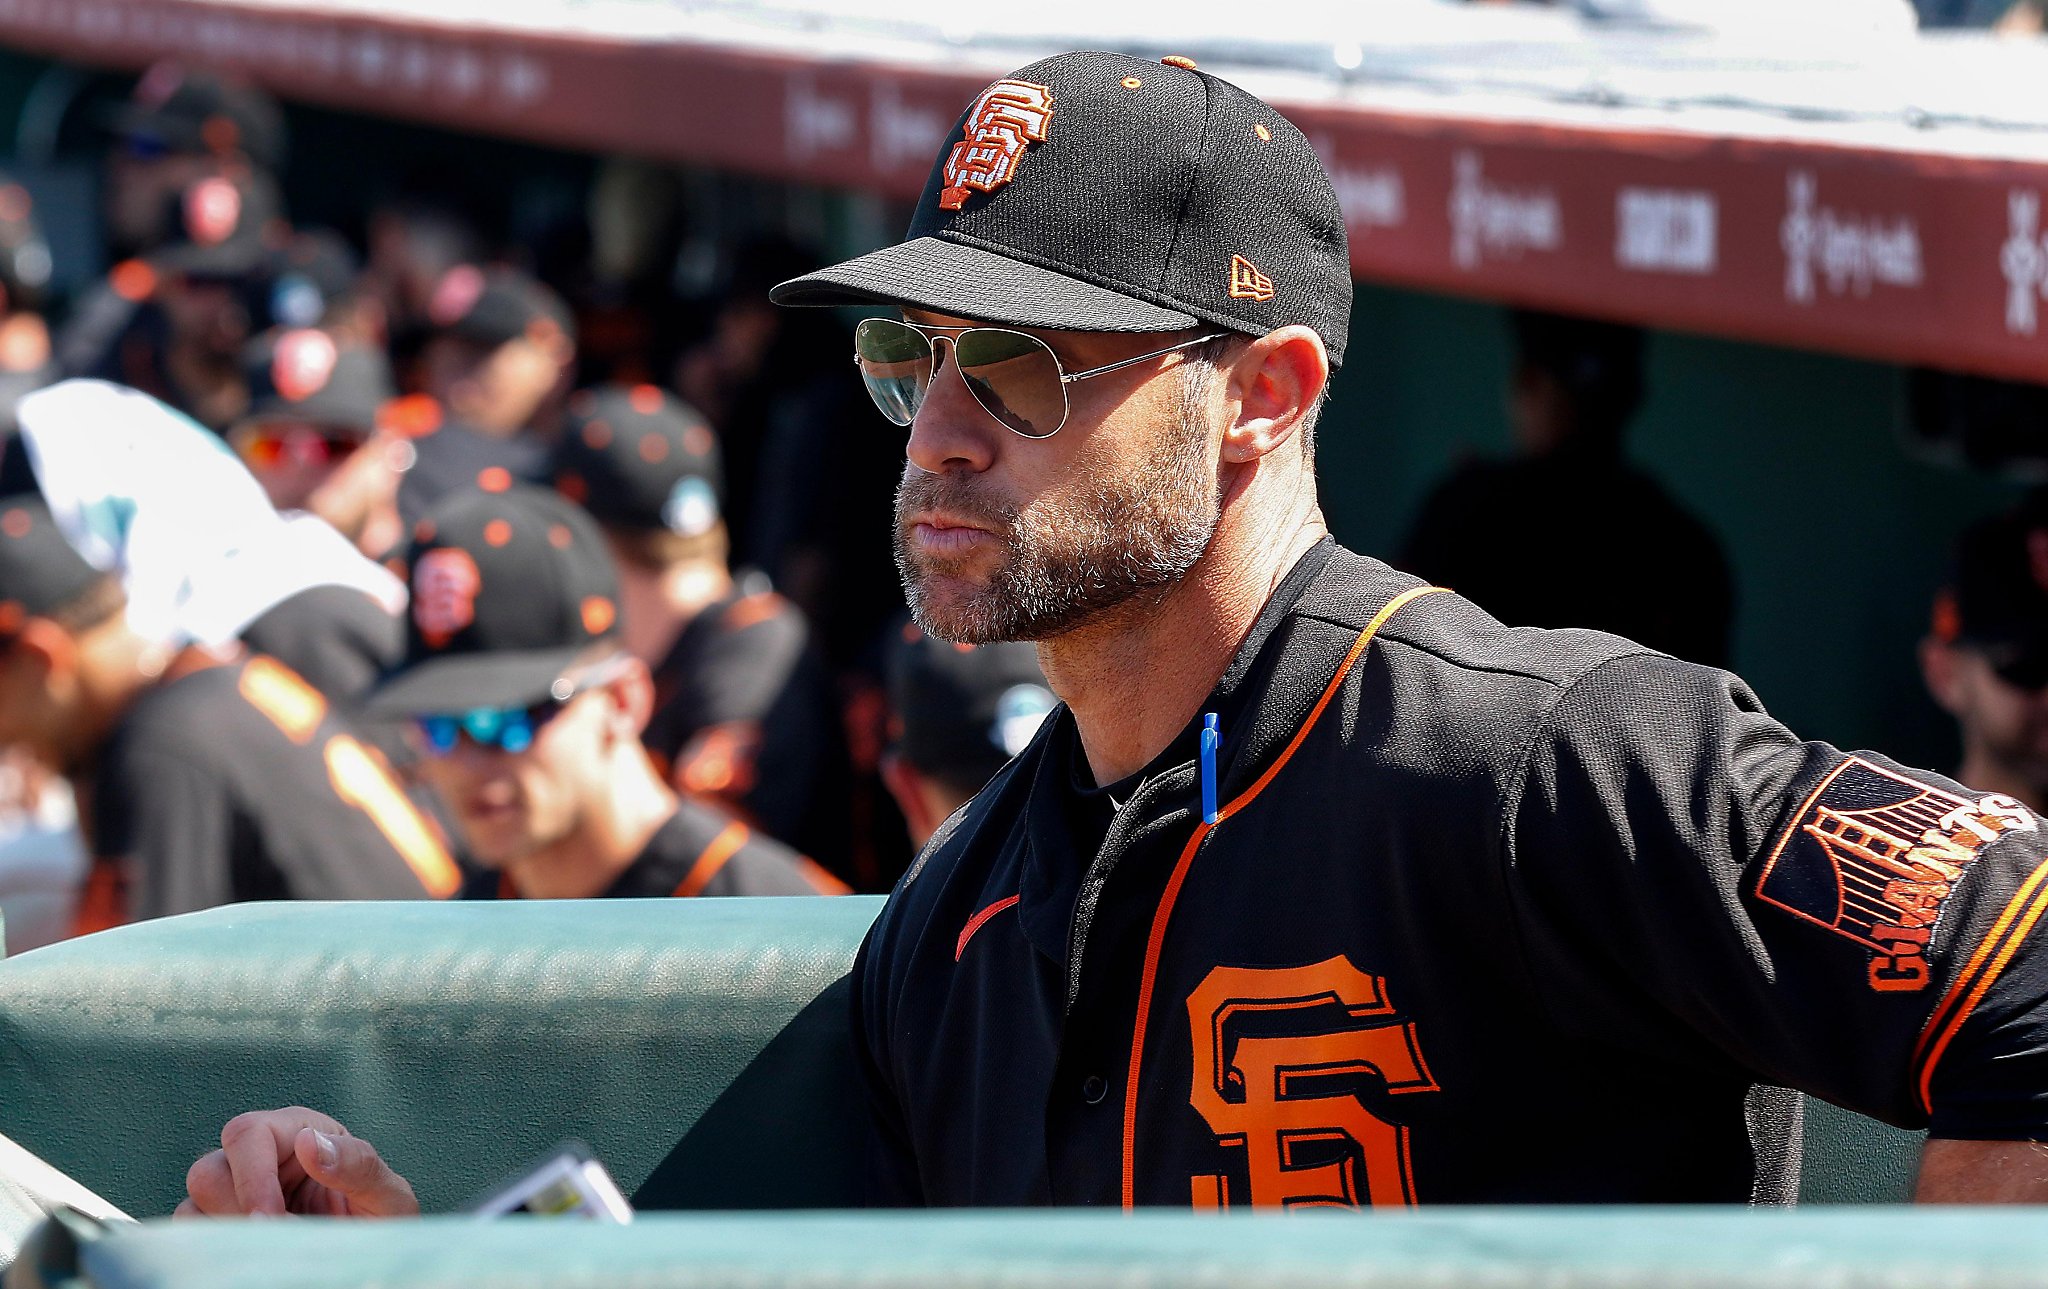 Giants try to get serious in a ballgame that features homers by